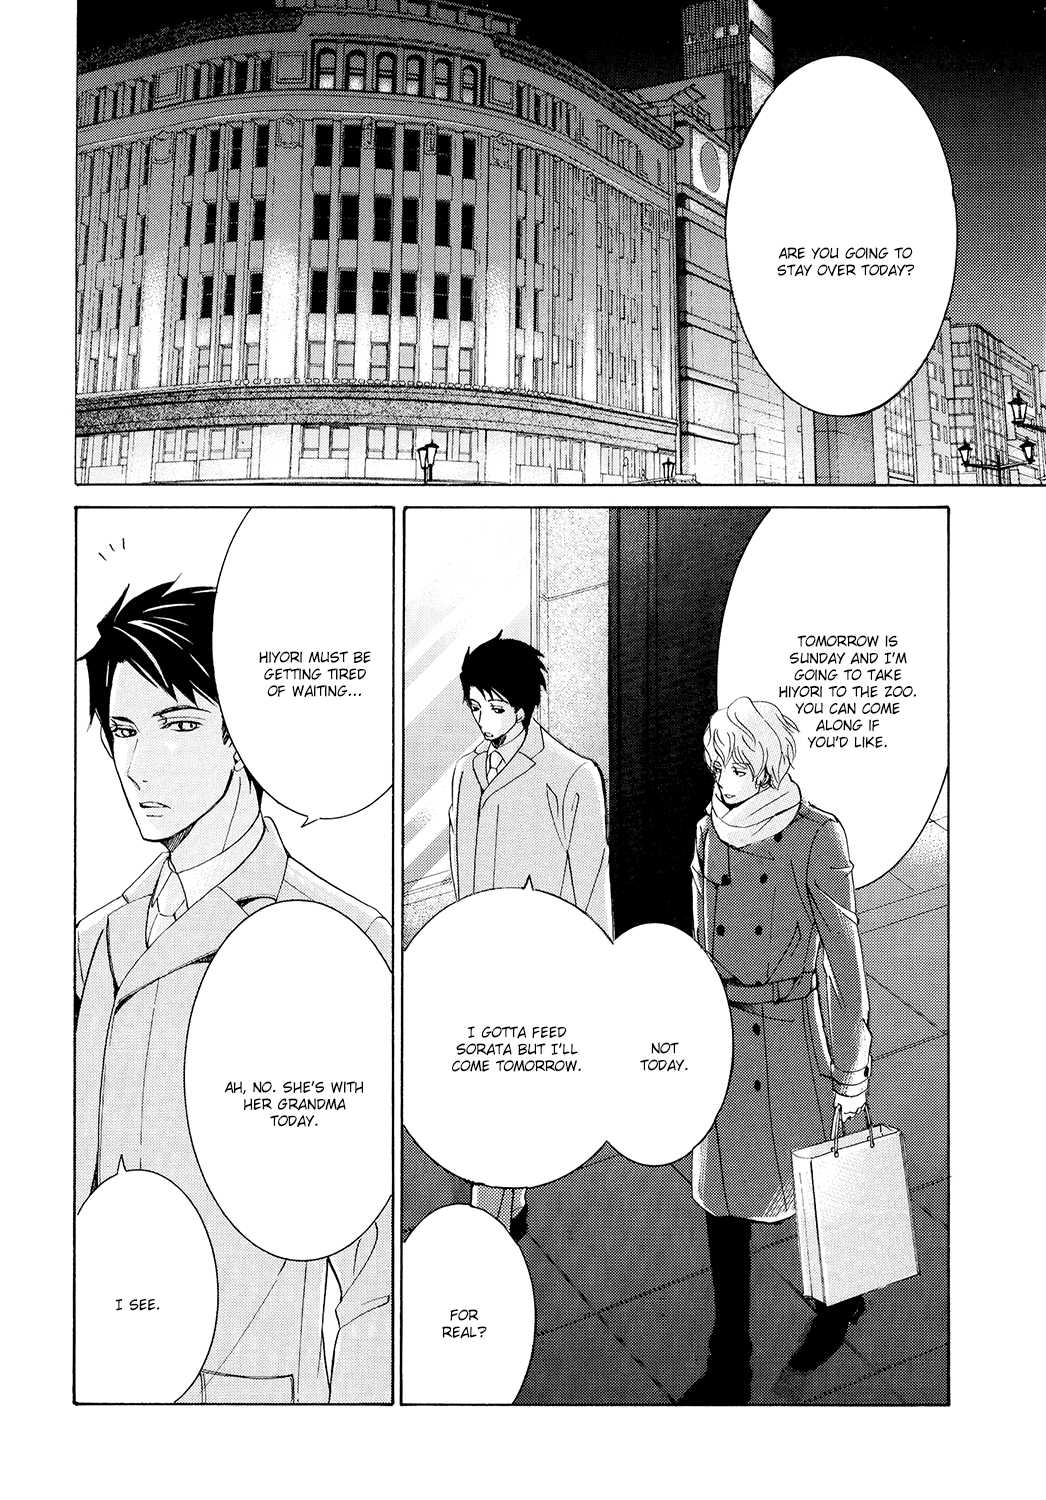 The World's Greatest First Love: The Case Of Ritsu Onodera - Page 2